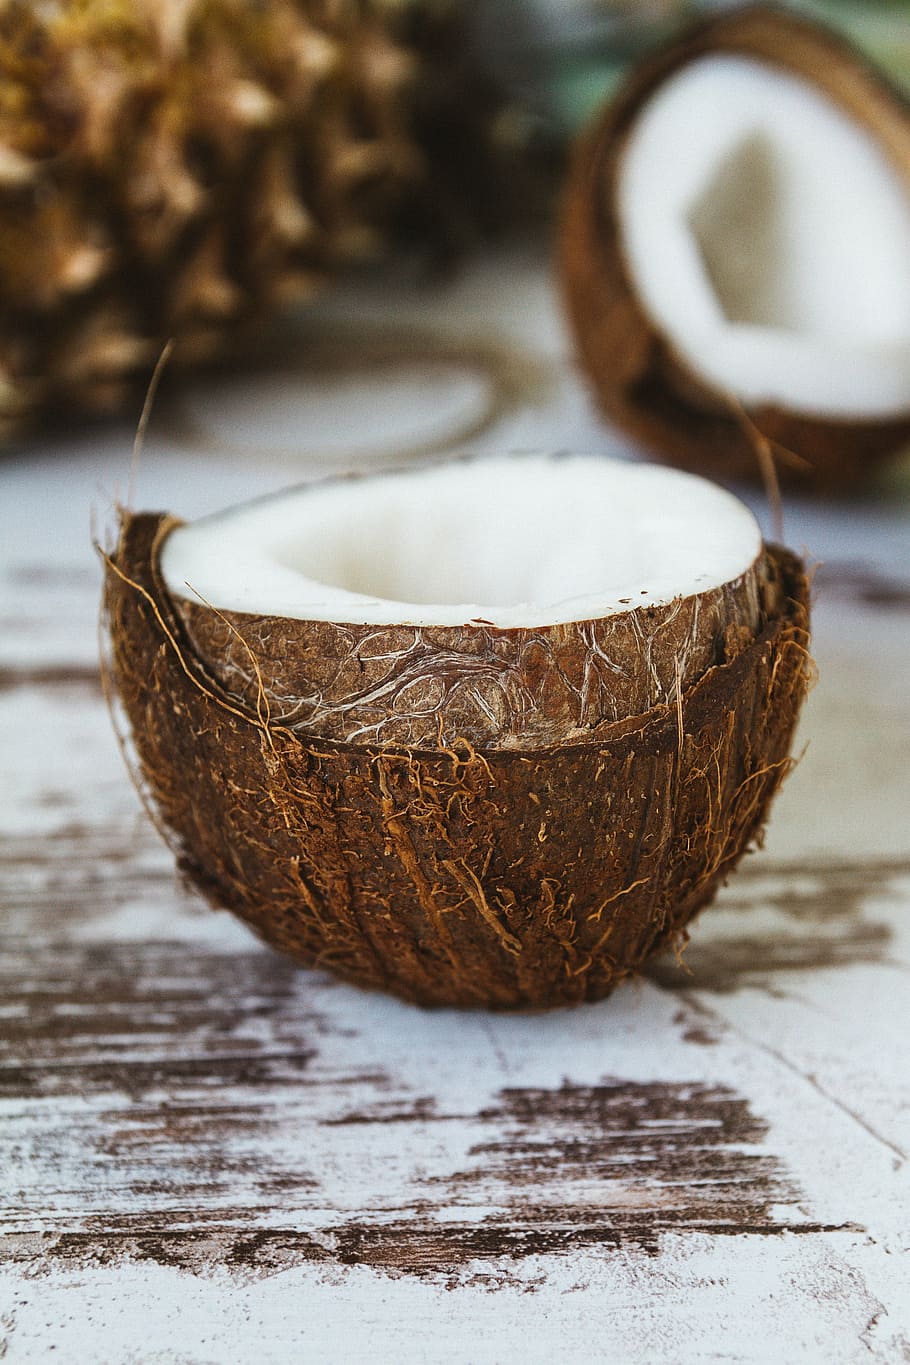 slice of coconut, close, coconut, shell, brown, fruit, food, dessert, table, ingredient